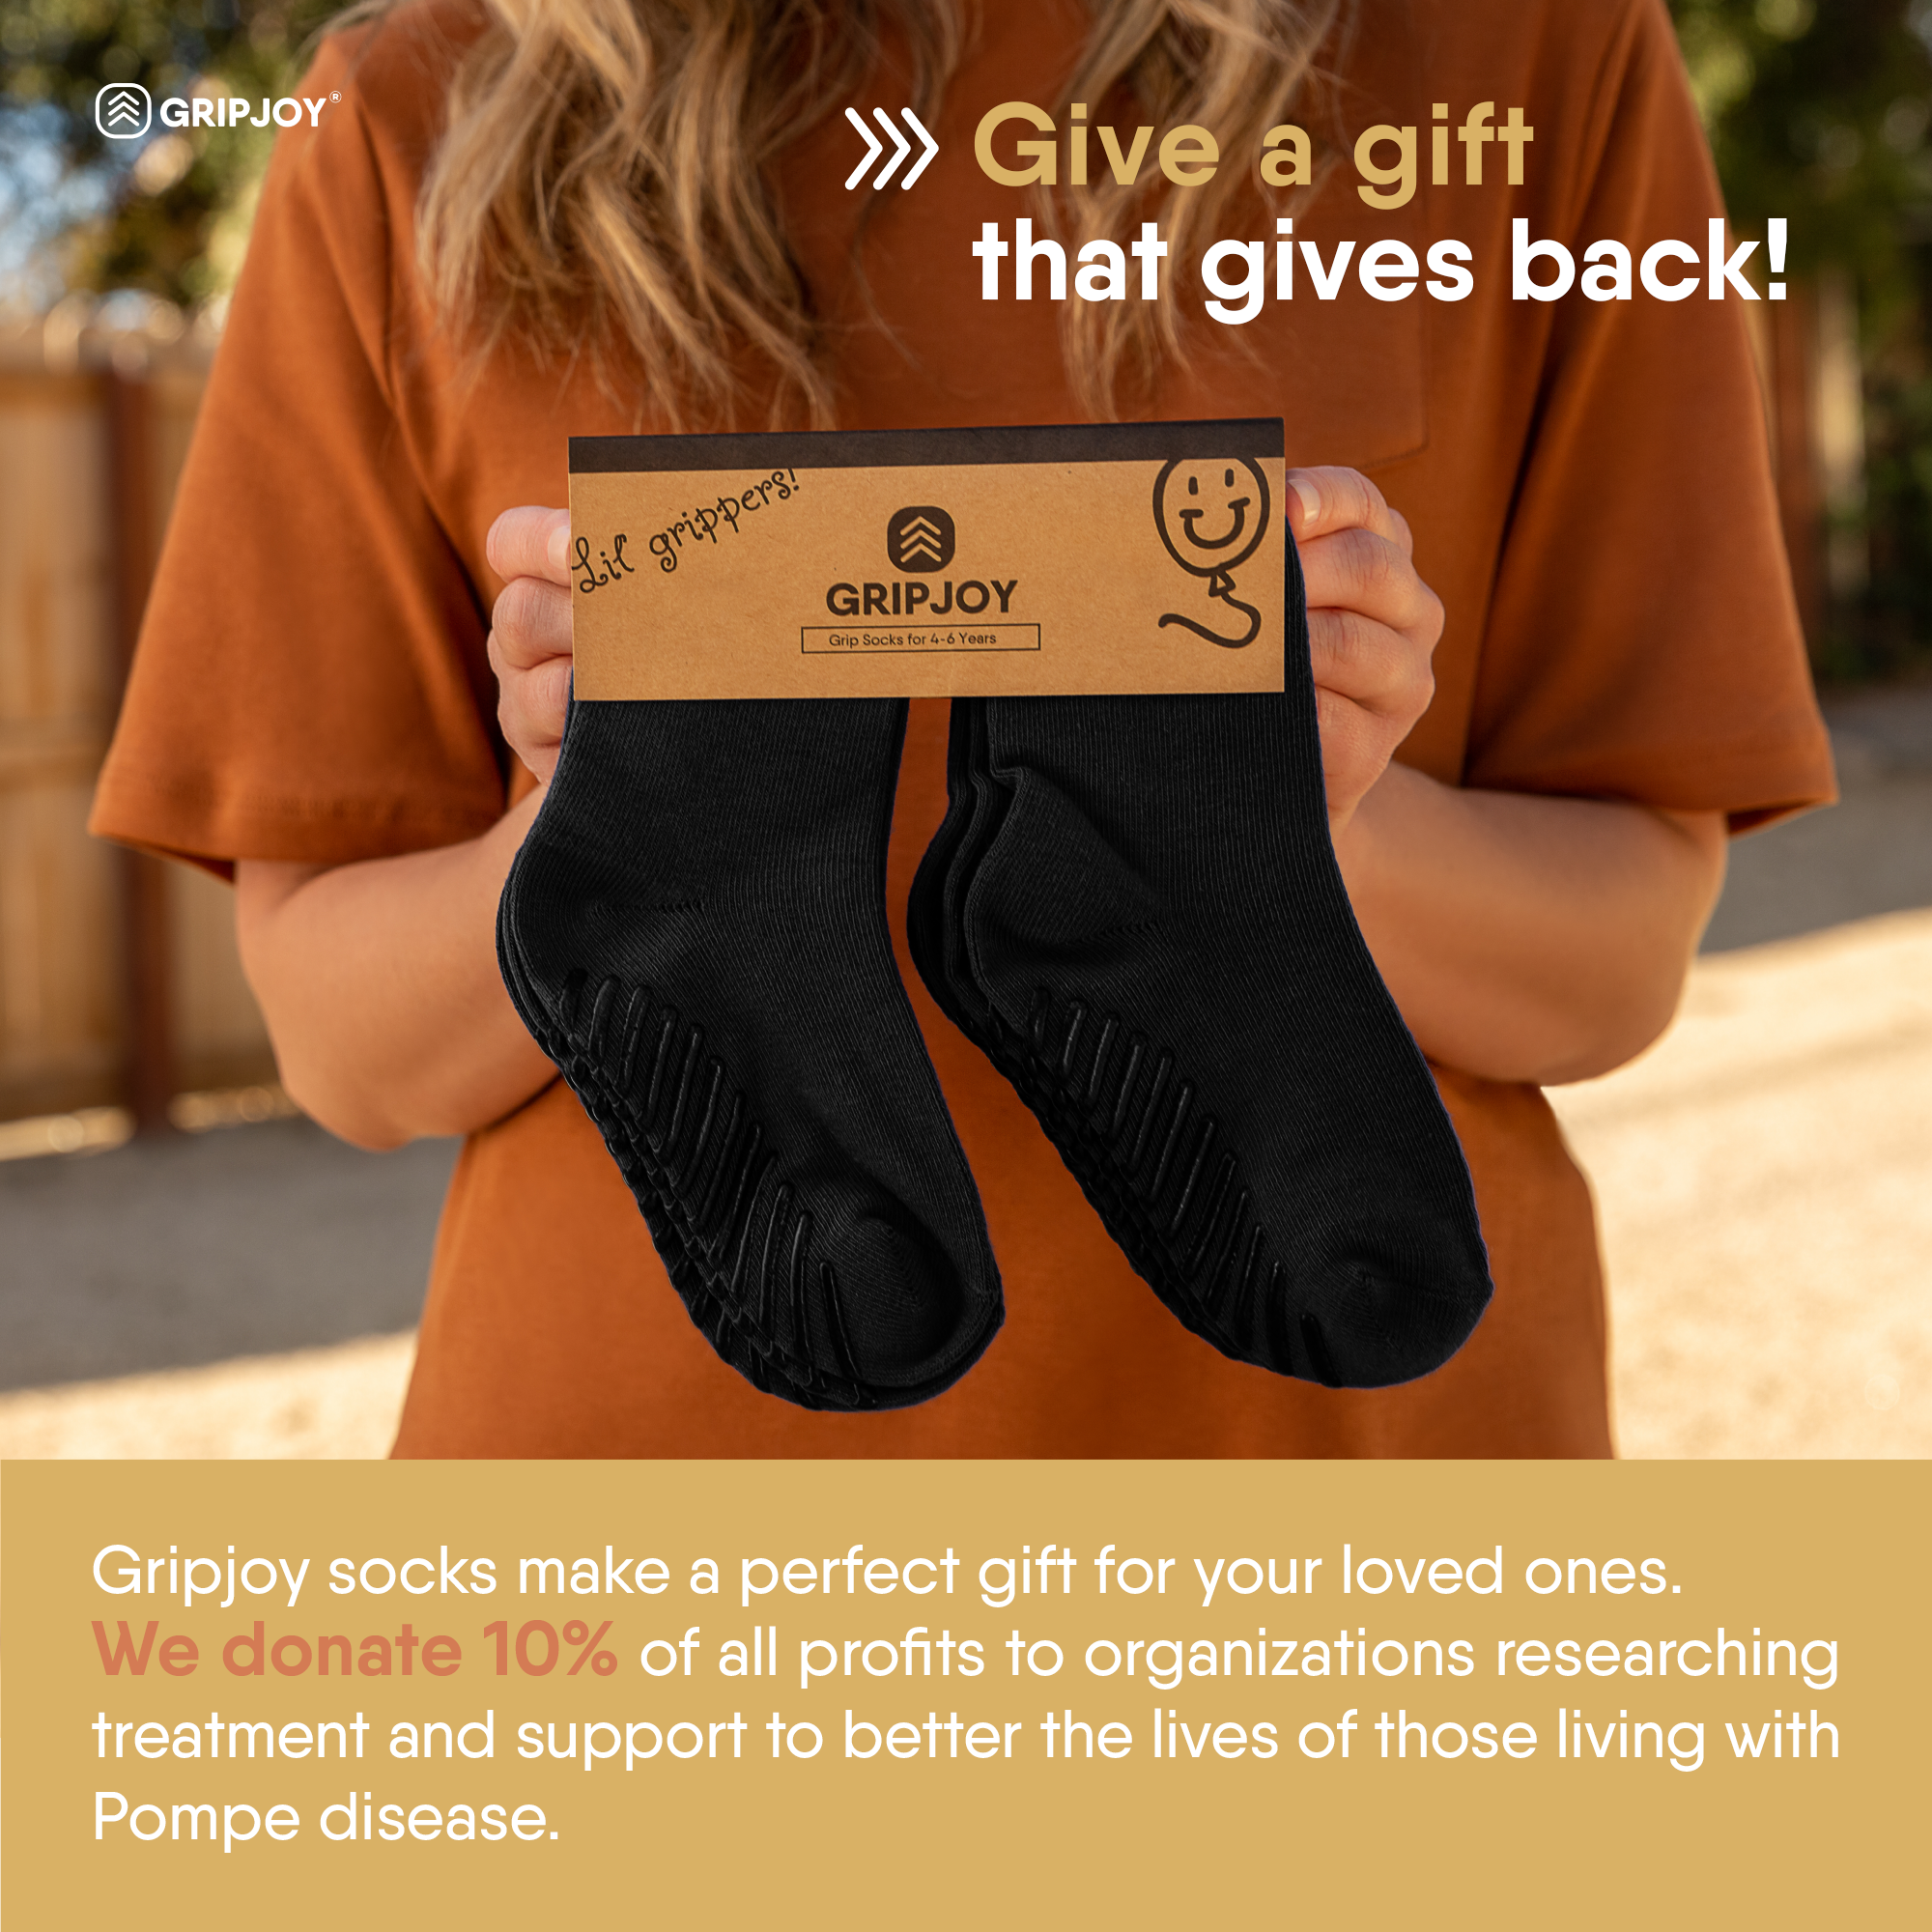 Treat yourself to new grip socks by bundling! Get 1 pair FREE when